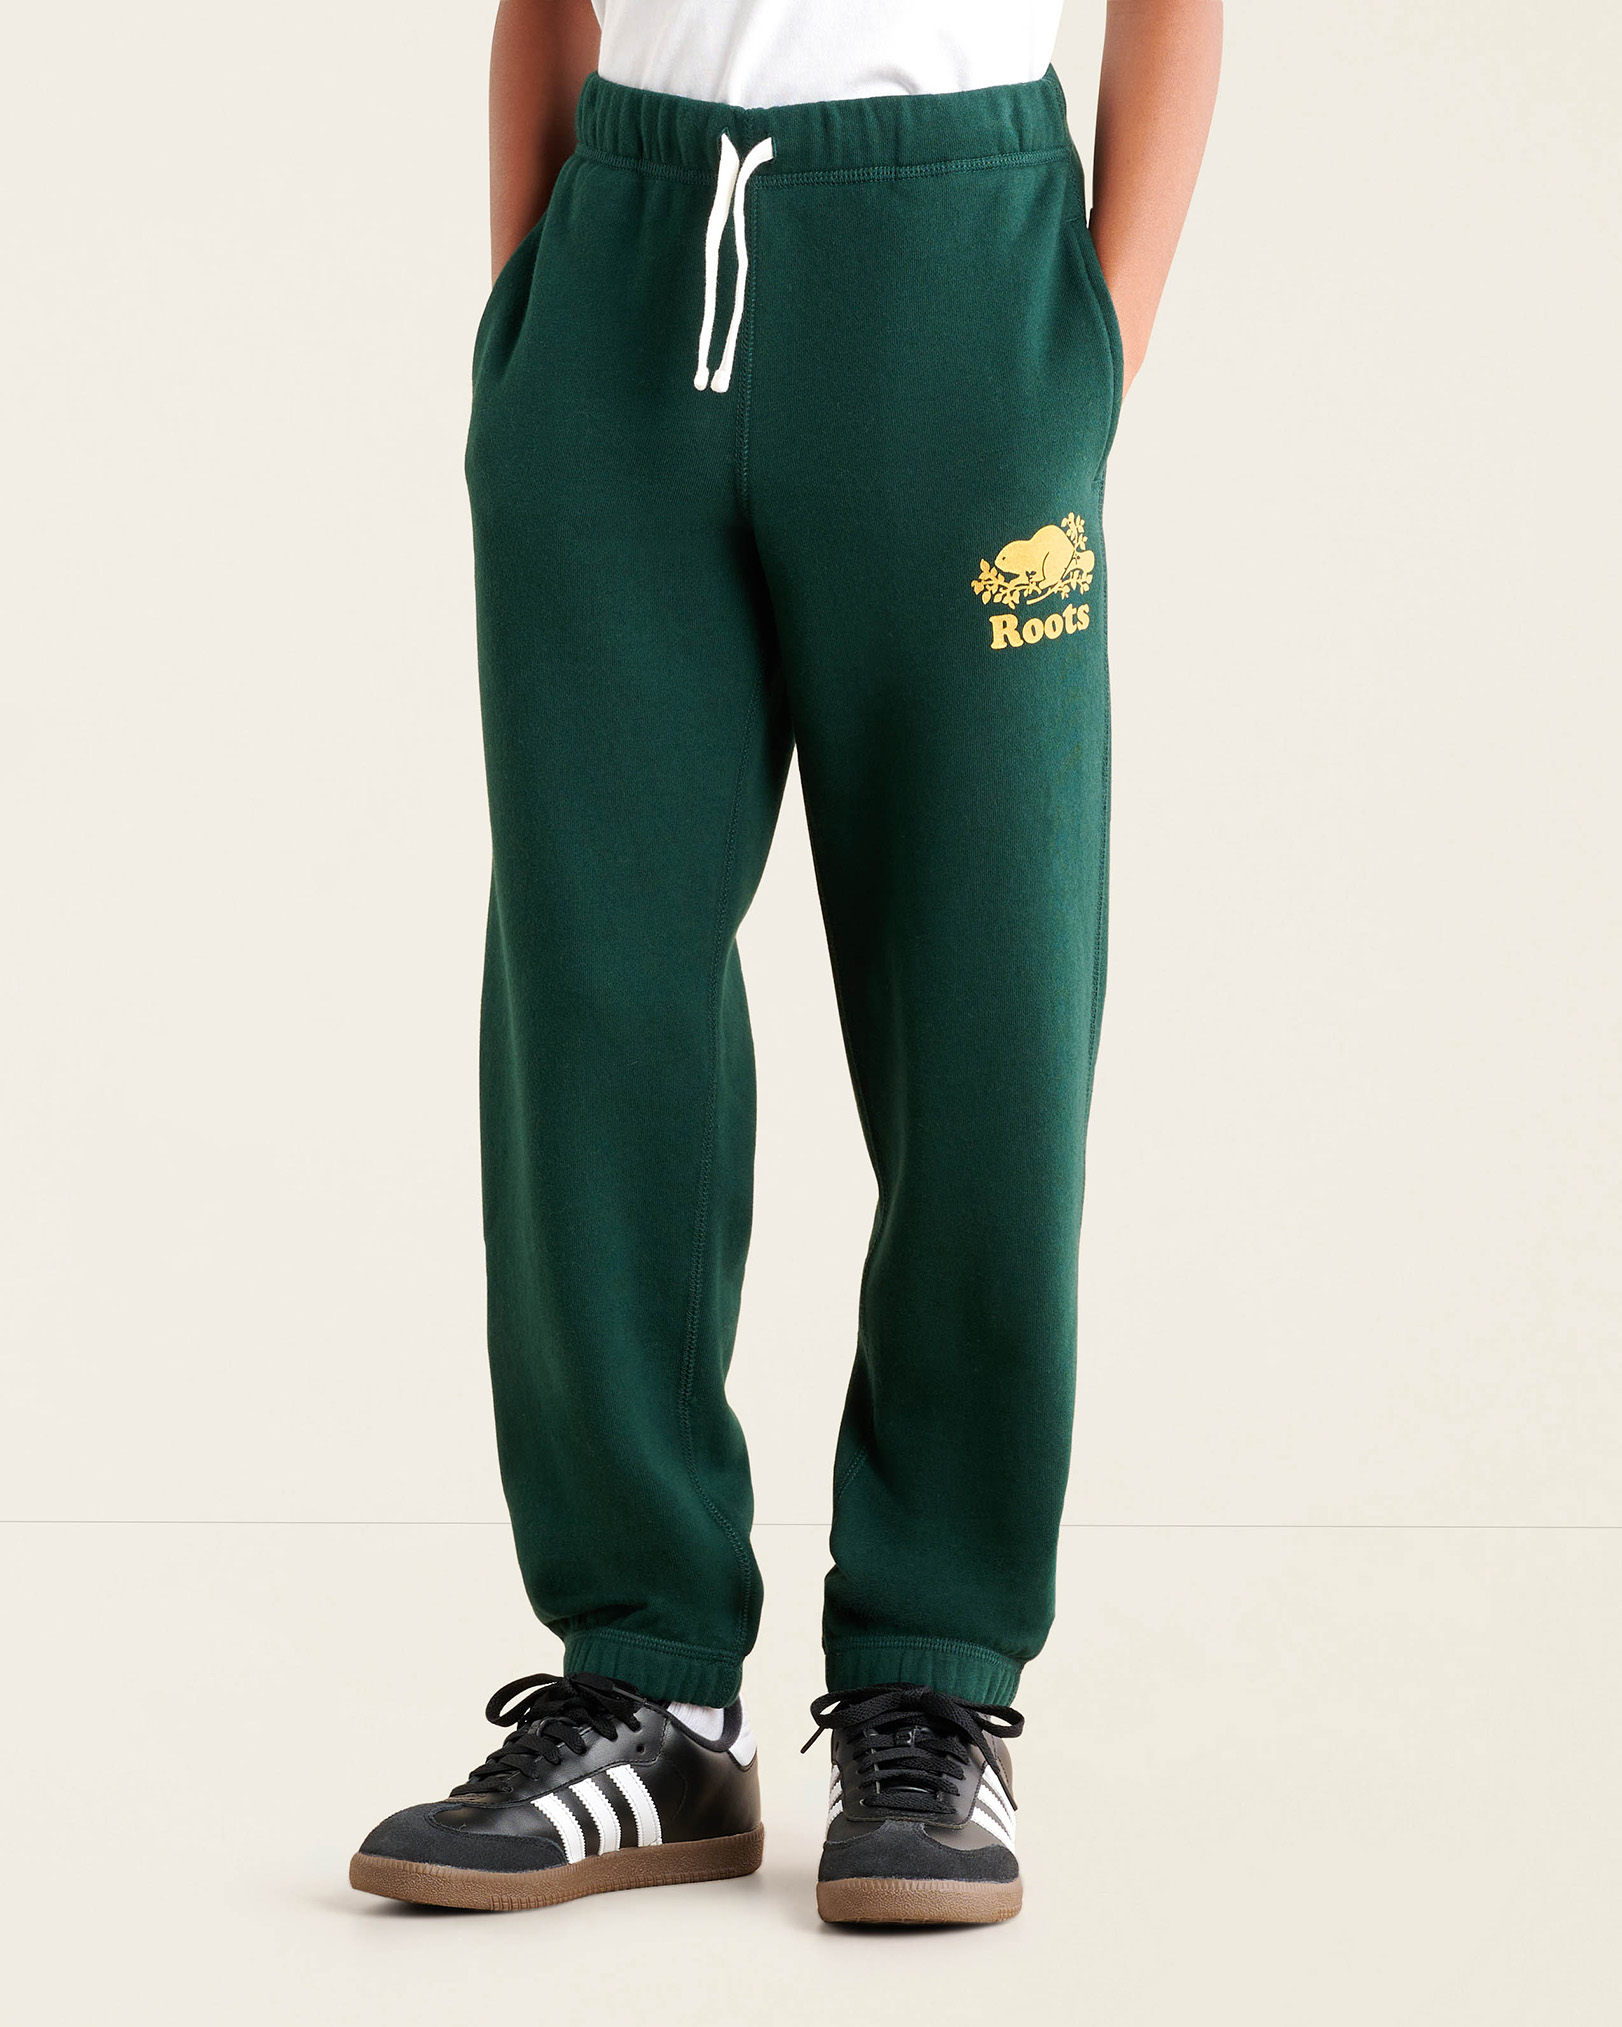 Roots Kids 50th Cooper Sweatpant in Varsity Green